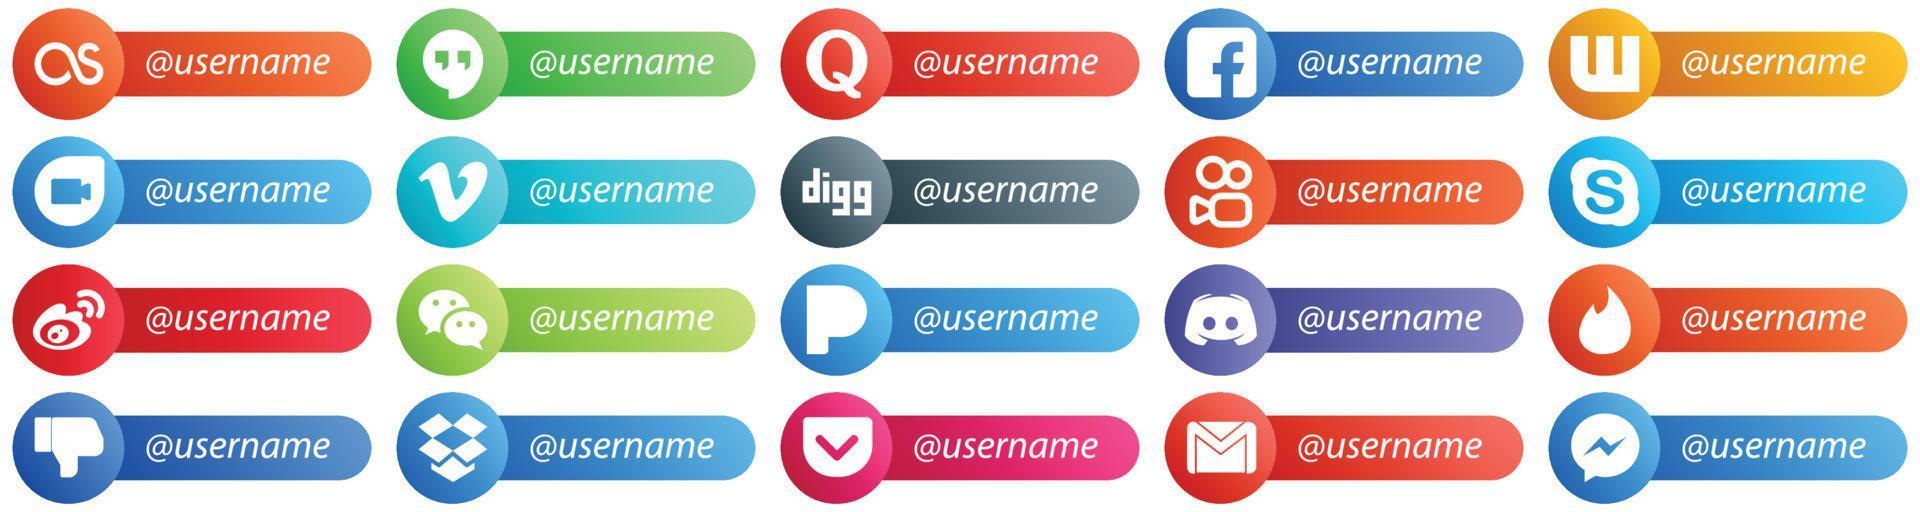 Follow me Social Network Platform Icons with Place for Username 20 pack such as china. weibo. google duo. chat and kuaishou icons. Clean and professional vector